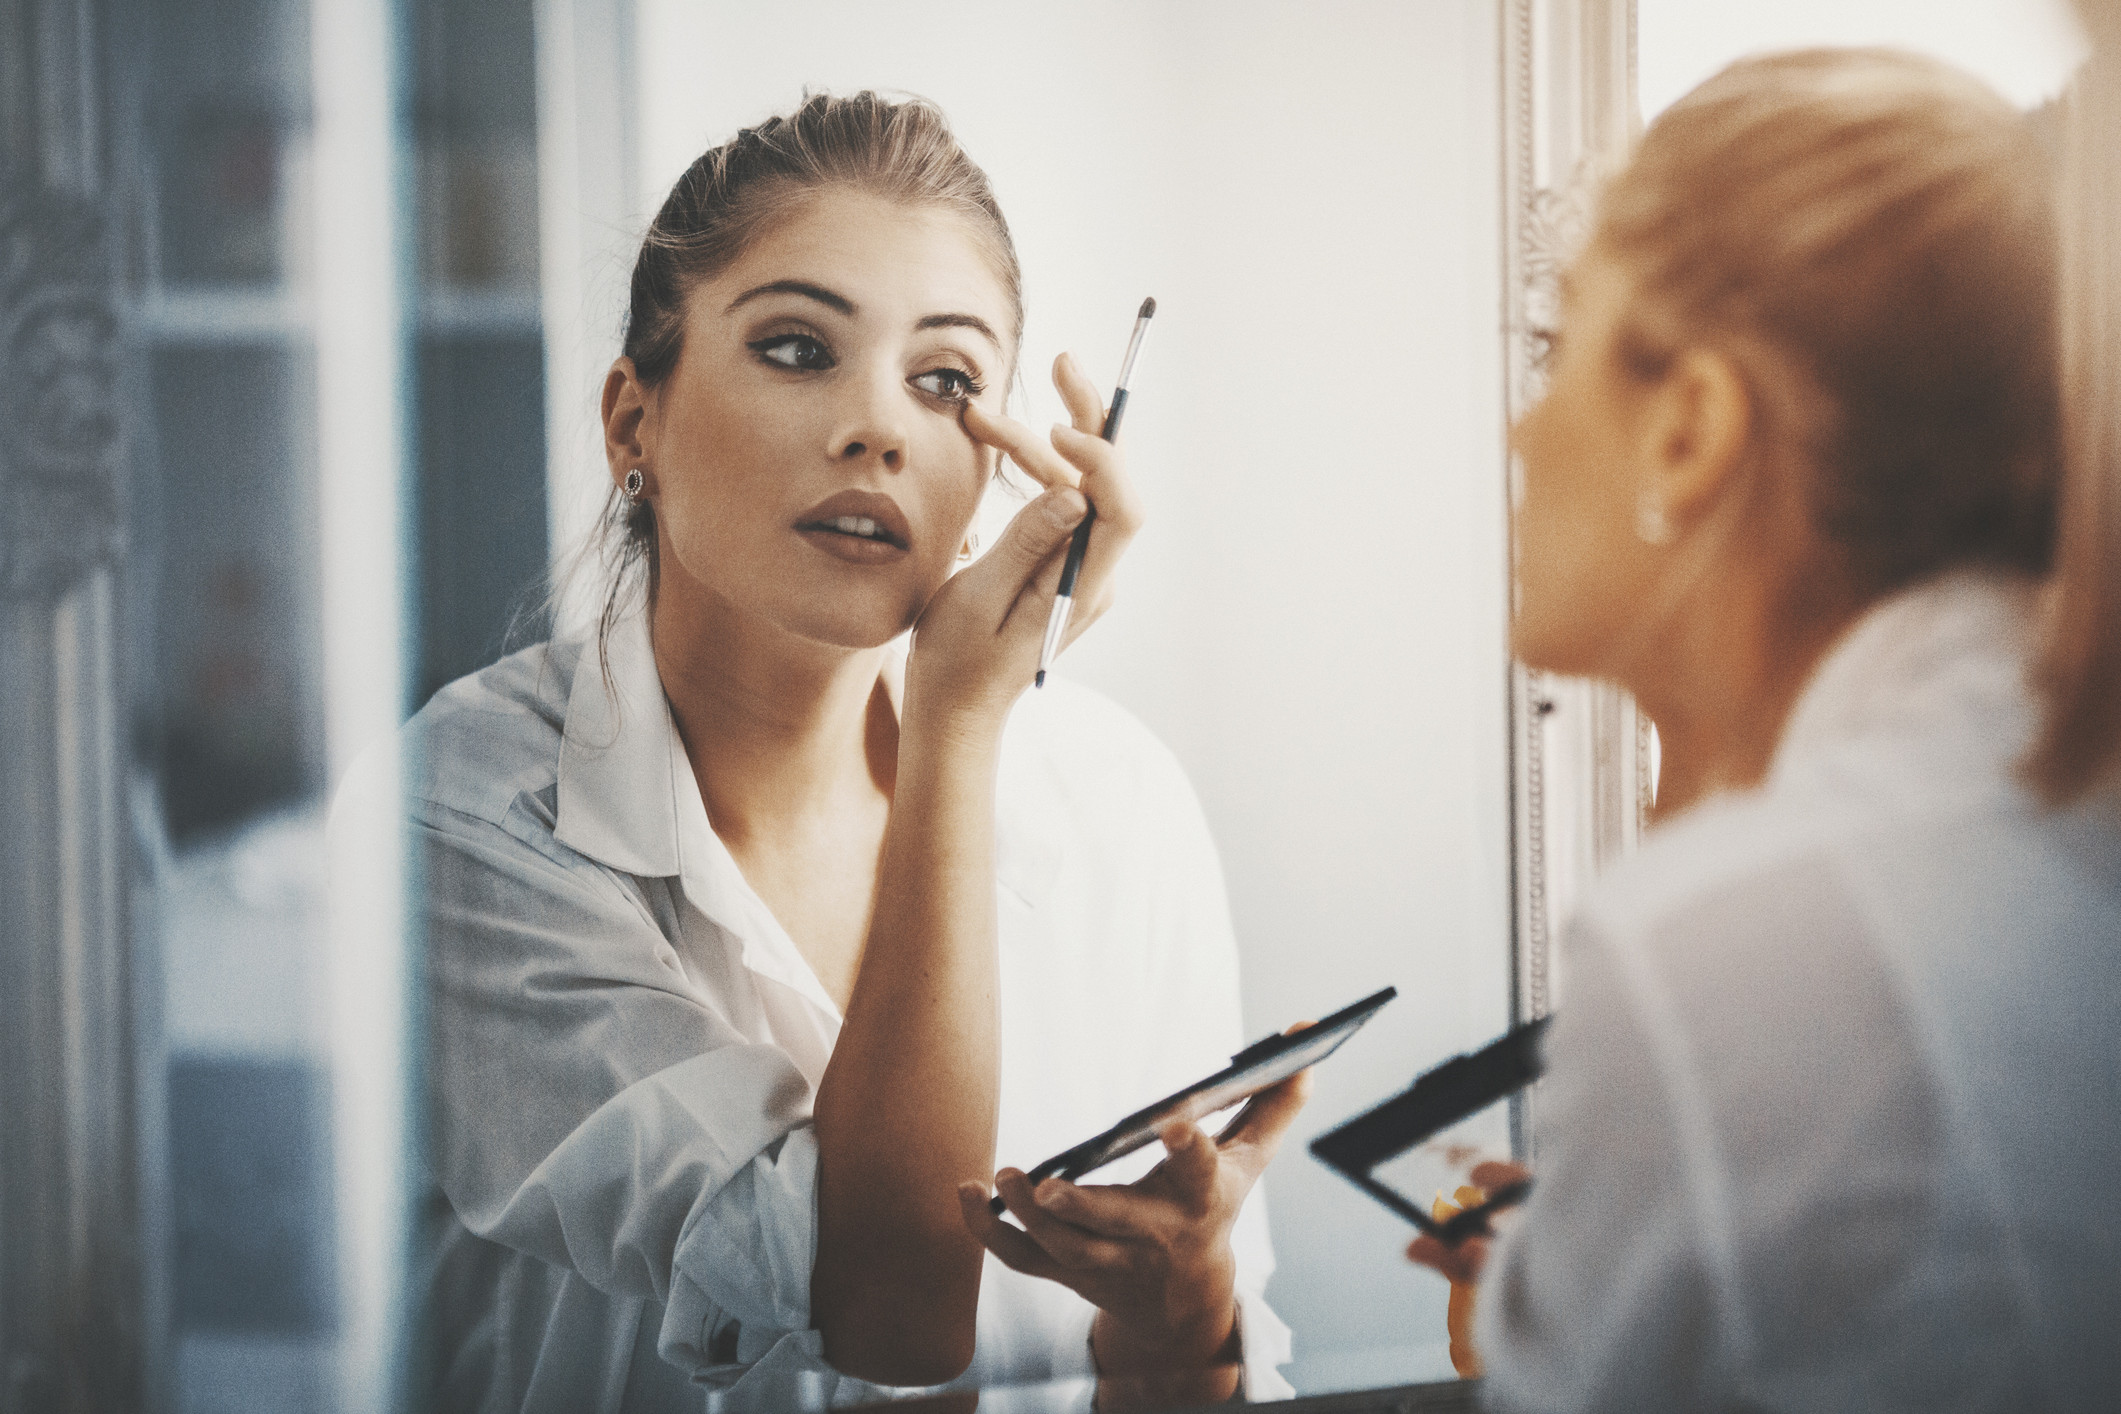 An image of a woman doing her makeup in the mirror after spring cleaning her makeup bag.